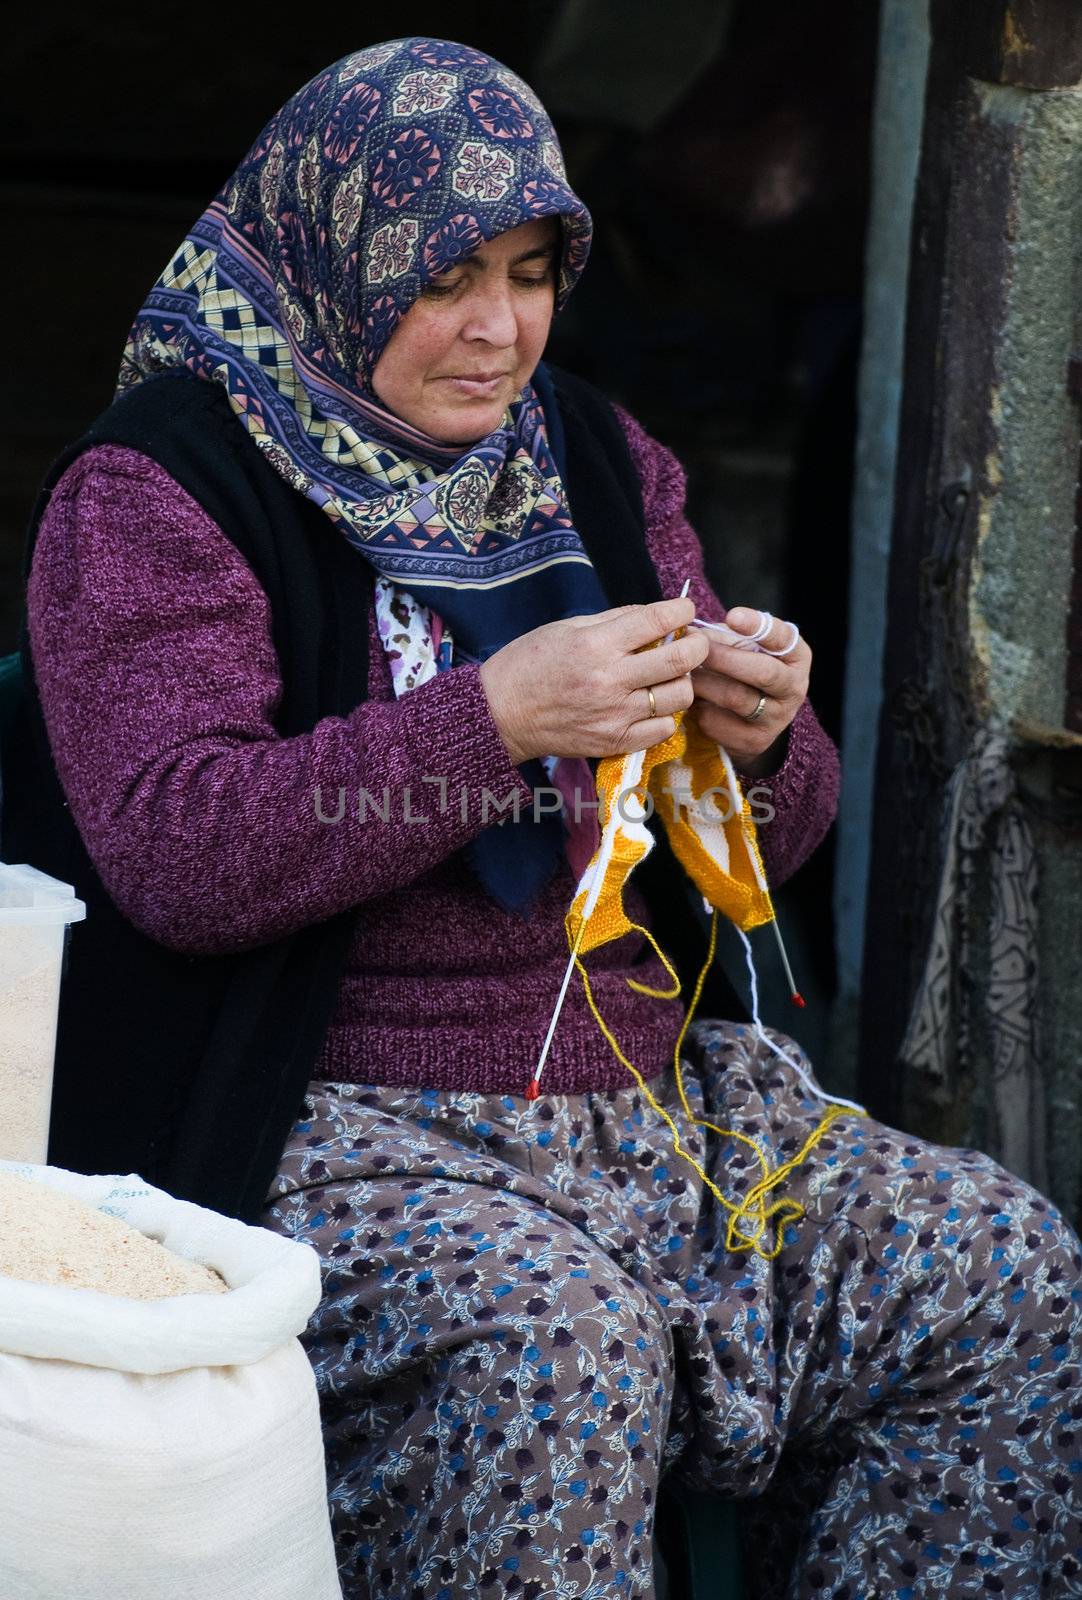 April 2008 Ankara Turkey - traditional Turkish woman knitting out in the street